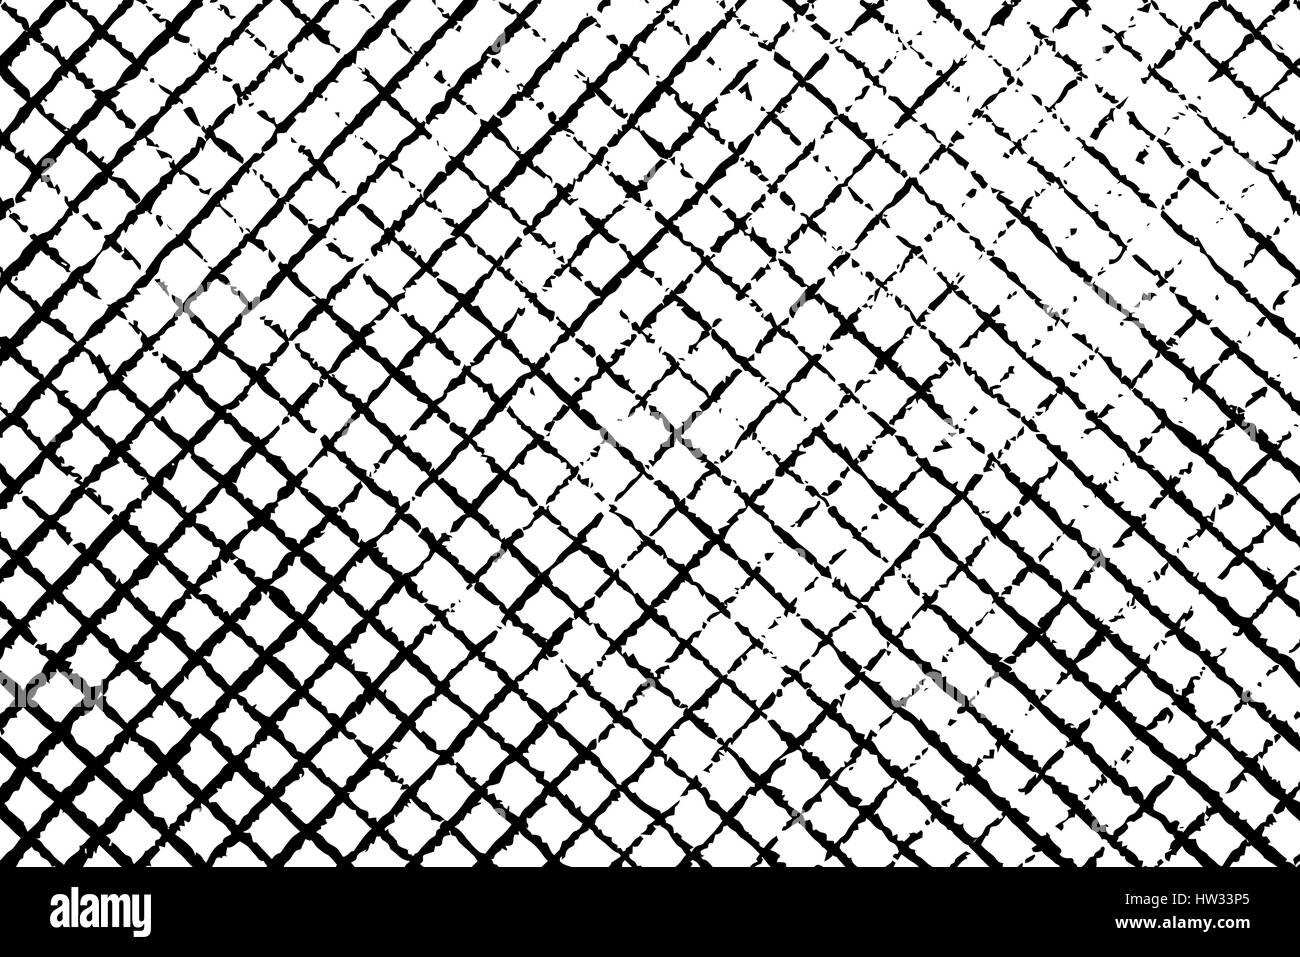 Isolated grunge texture of geometric material in black and white, vintage background resource. EPS10 vector. Stock Vector